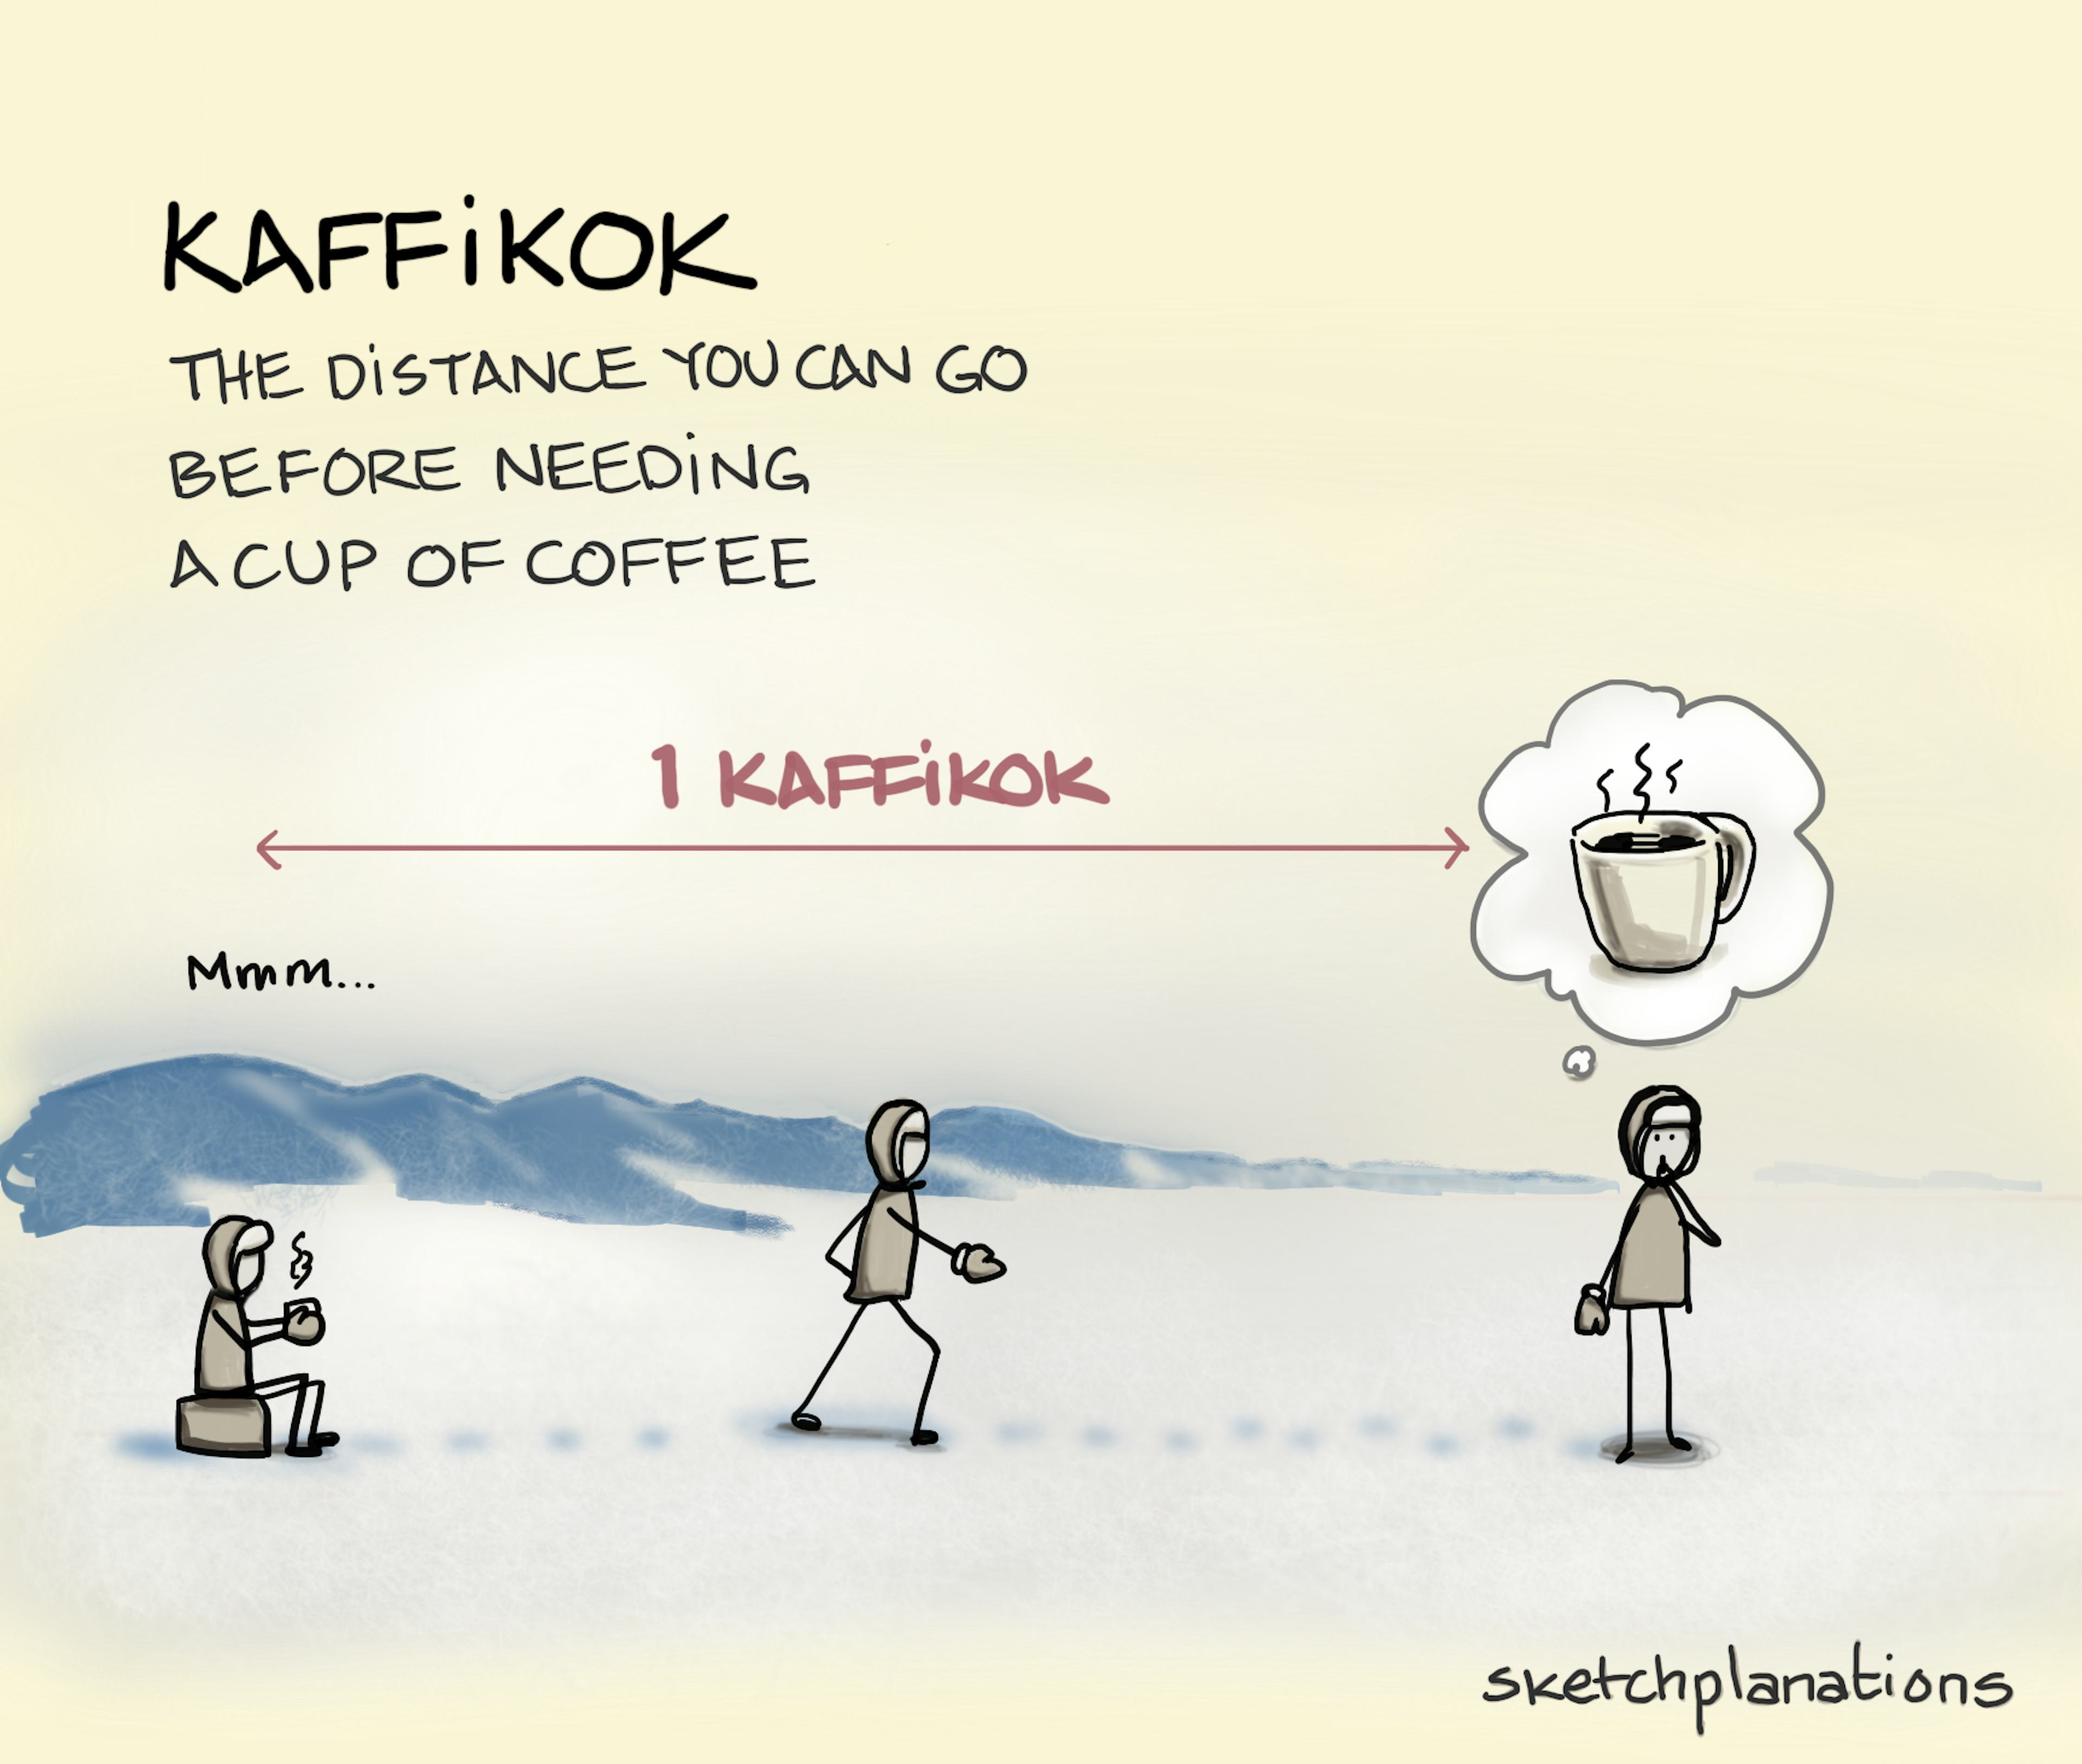 Kaffikok illustration: wrapped up warm in a snowy landscape, a person sits and enjoys a coffee, before setting off on foot and stopping again some time later distracted by thoughts of another coffee. The distance travelled is shown as 1 Kaffikok. 